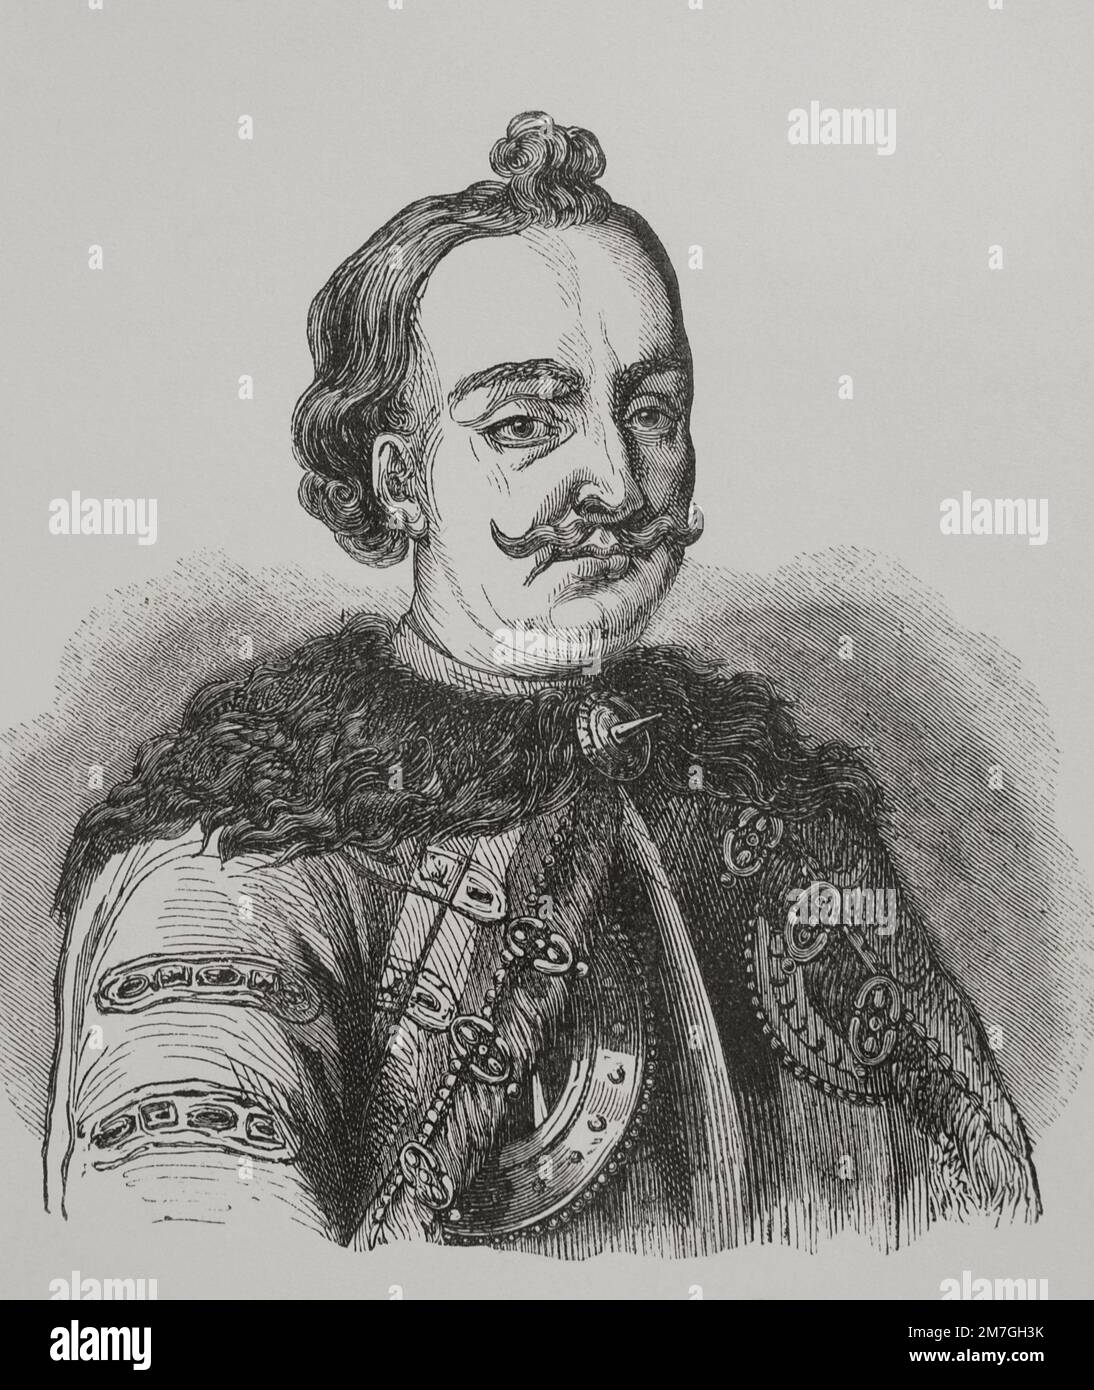 Imre Thököly (1657-1705). Hungarian nobleman who for a short period founded the Principality of Upper Hungary (1682-1685). In 1690 he became Prince of Transylvania. Portrait. Engraving. 'Los Heroes y las Grandezas de la Tierra' (The Heroes and the Grandeurs of the Earth). Volume VI. 1856. Stock Photo